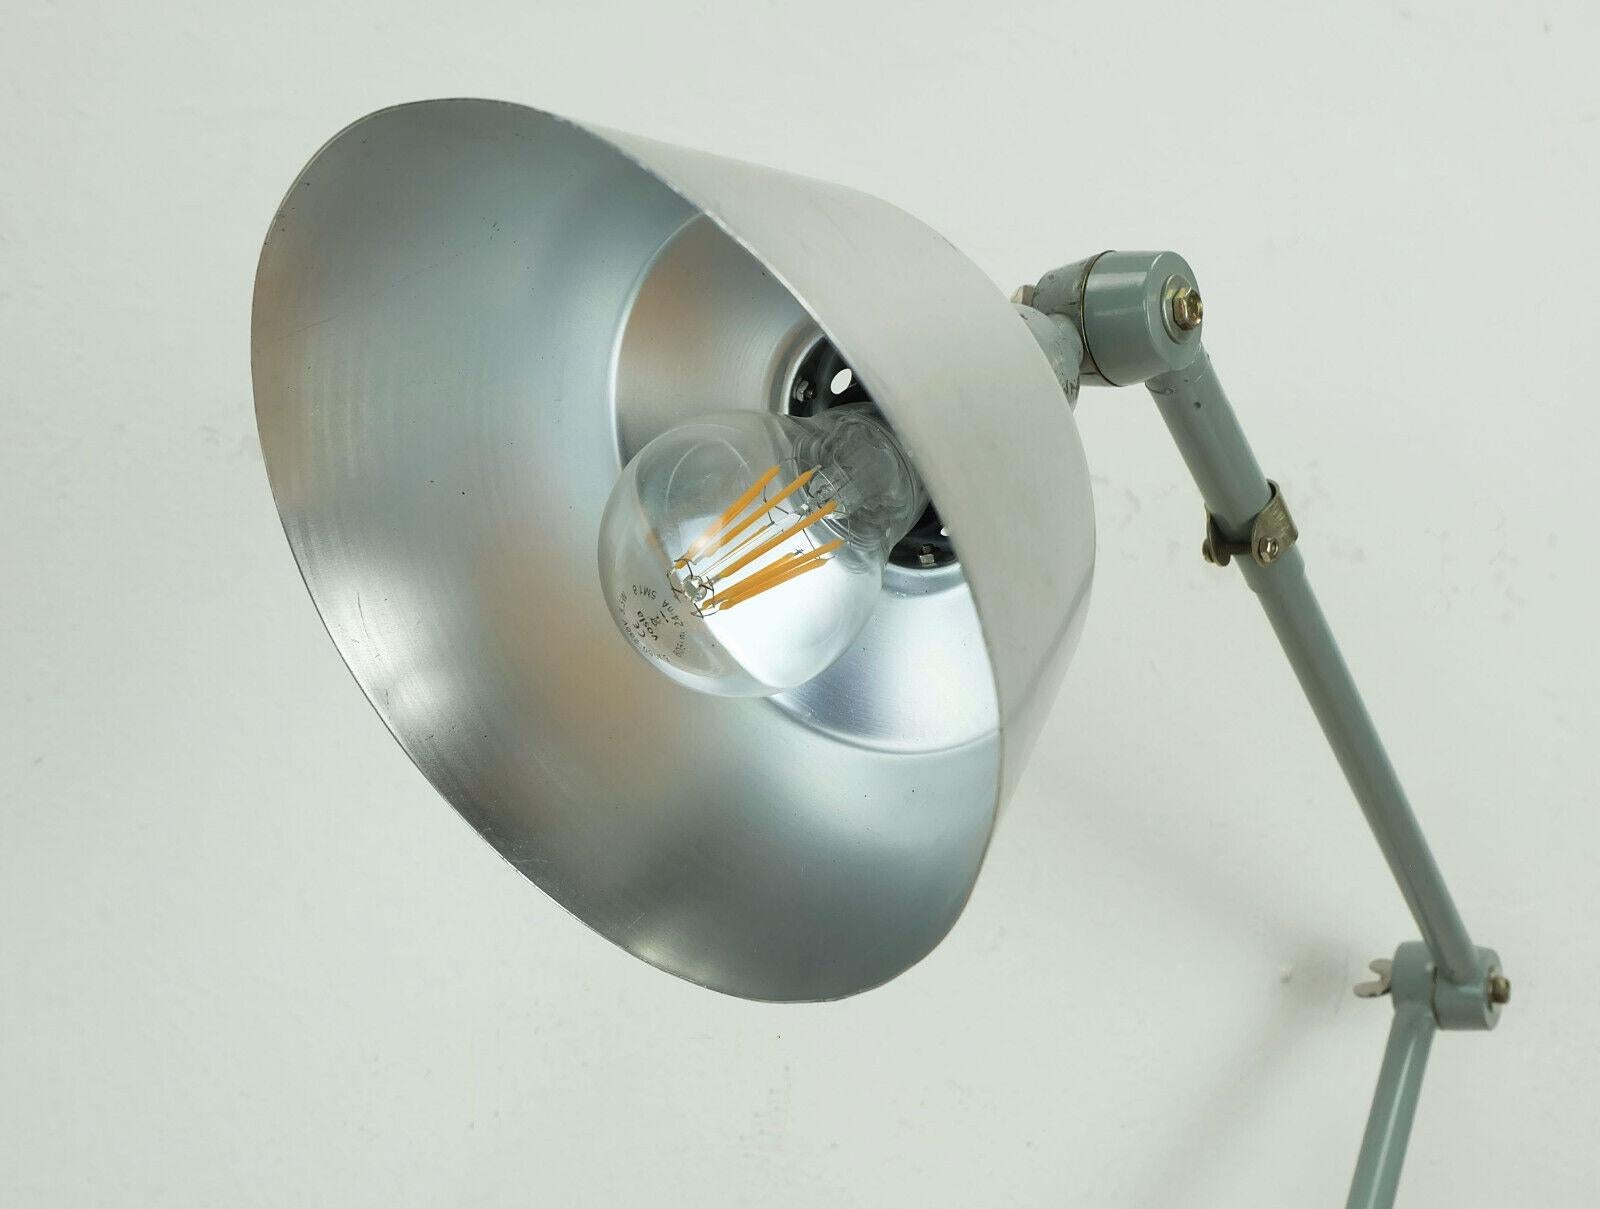 Midgard R2 desk lamp, originally designed by Curt Fischer, this version was manufactured in the 1960s. Adjustable height thanks to several joints and rotatable on the base. The shade is made of aluminum, the arm is made of gray painted metal. The